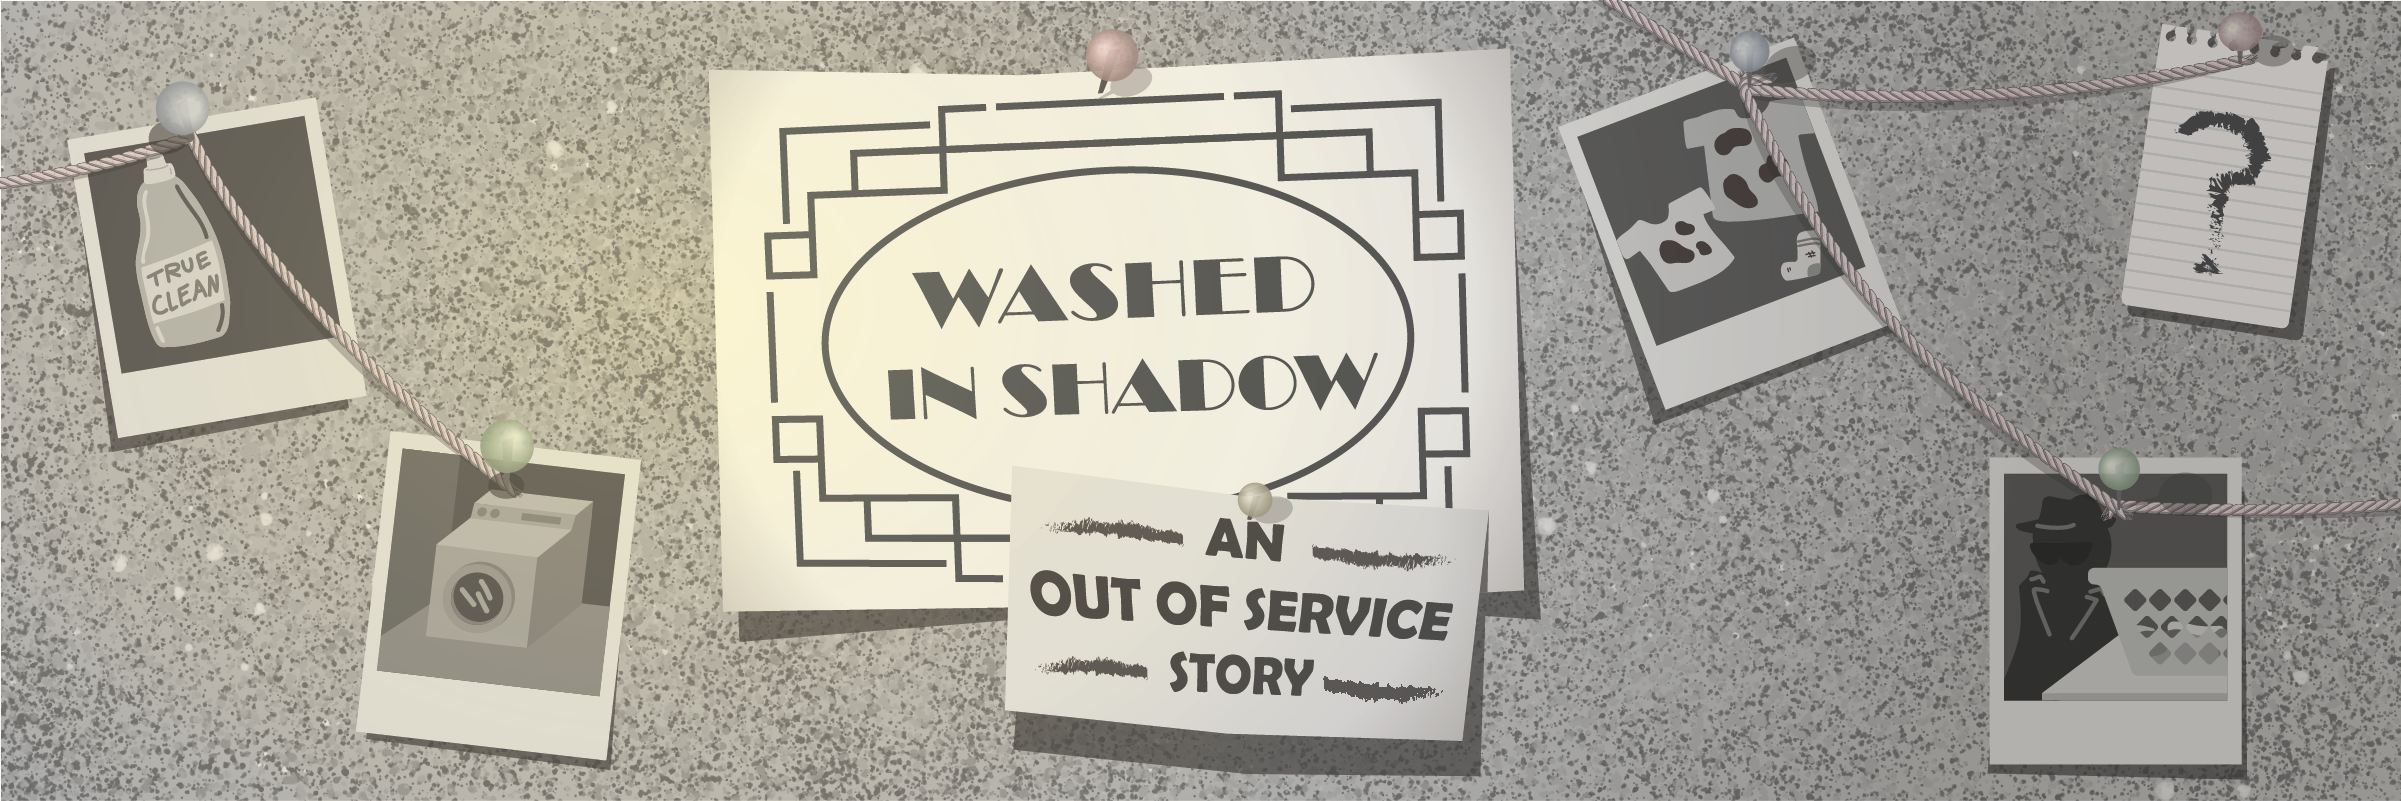 Washed in Shadow - An Out of Service Story